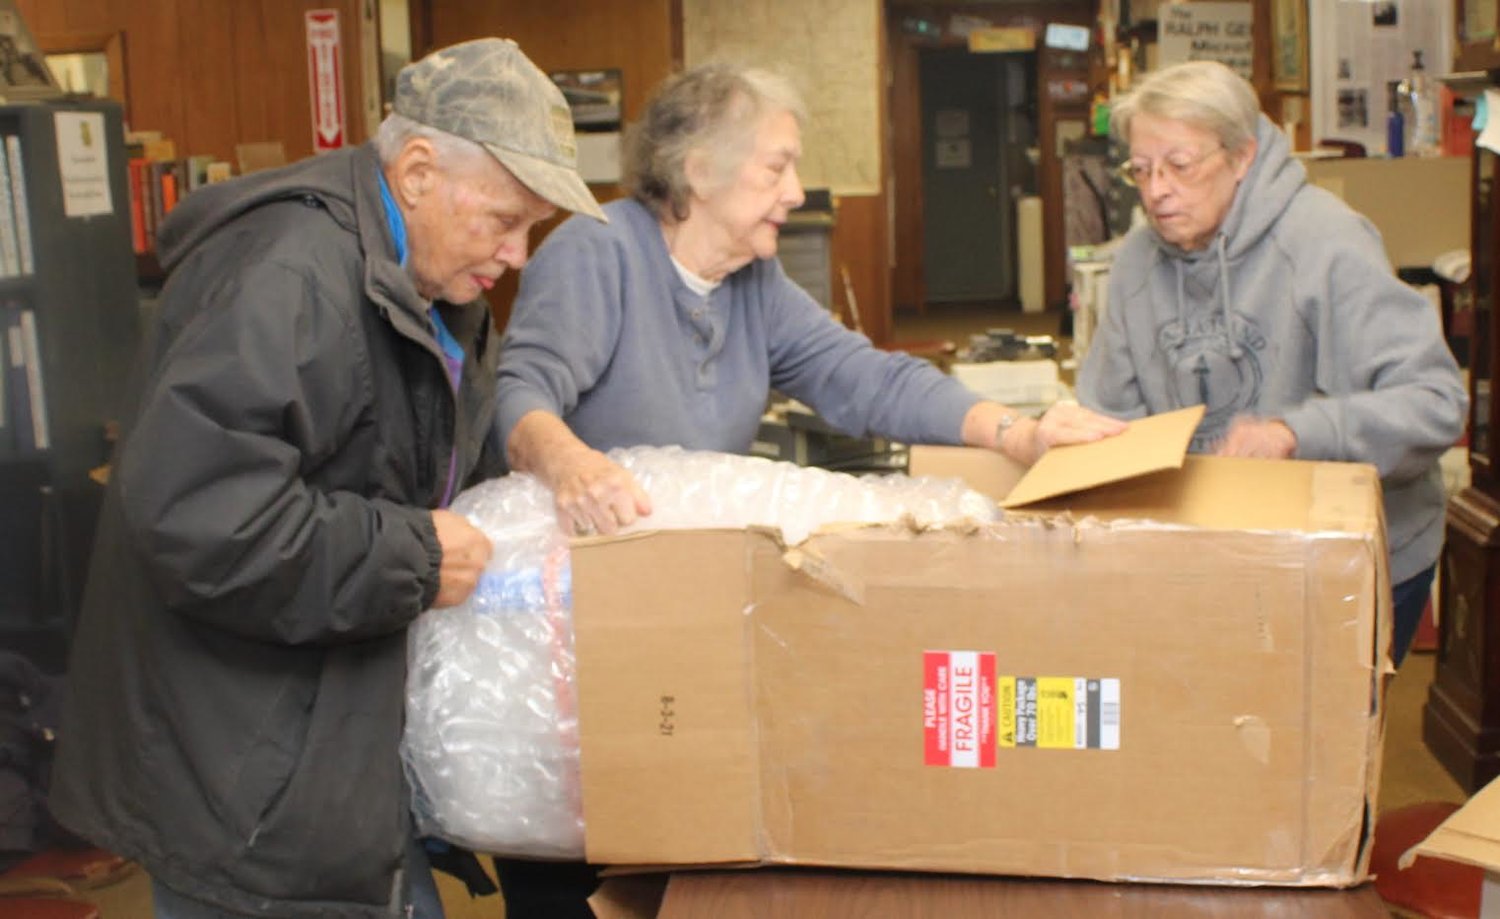 David Campbell, Joyce A. Cooper-Campbell and Shirley Slusing carefully unpack the 70-pound bust of local favorite son Omar N. Bradley recently donated to the Randolph CountyHistorical Society by the Chosin Few, Korean War veterans who survived the Battle of Chosin Reservoir in 1950. Members of the Moberly Spartans football team had to carry the package into the museum. (Joe Barnes)